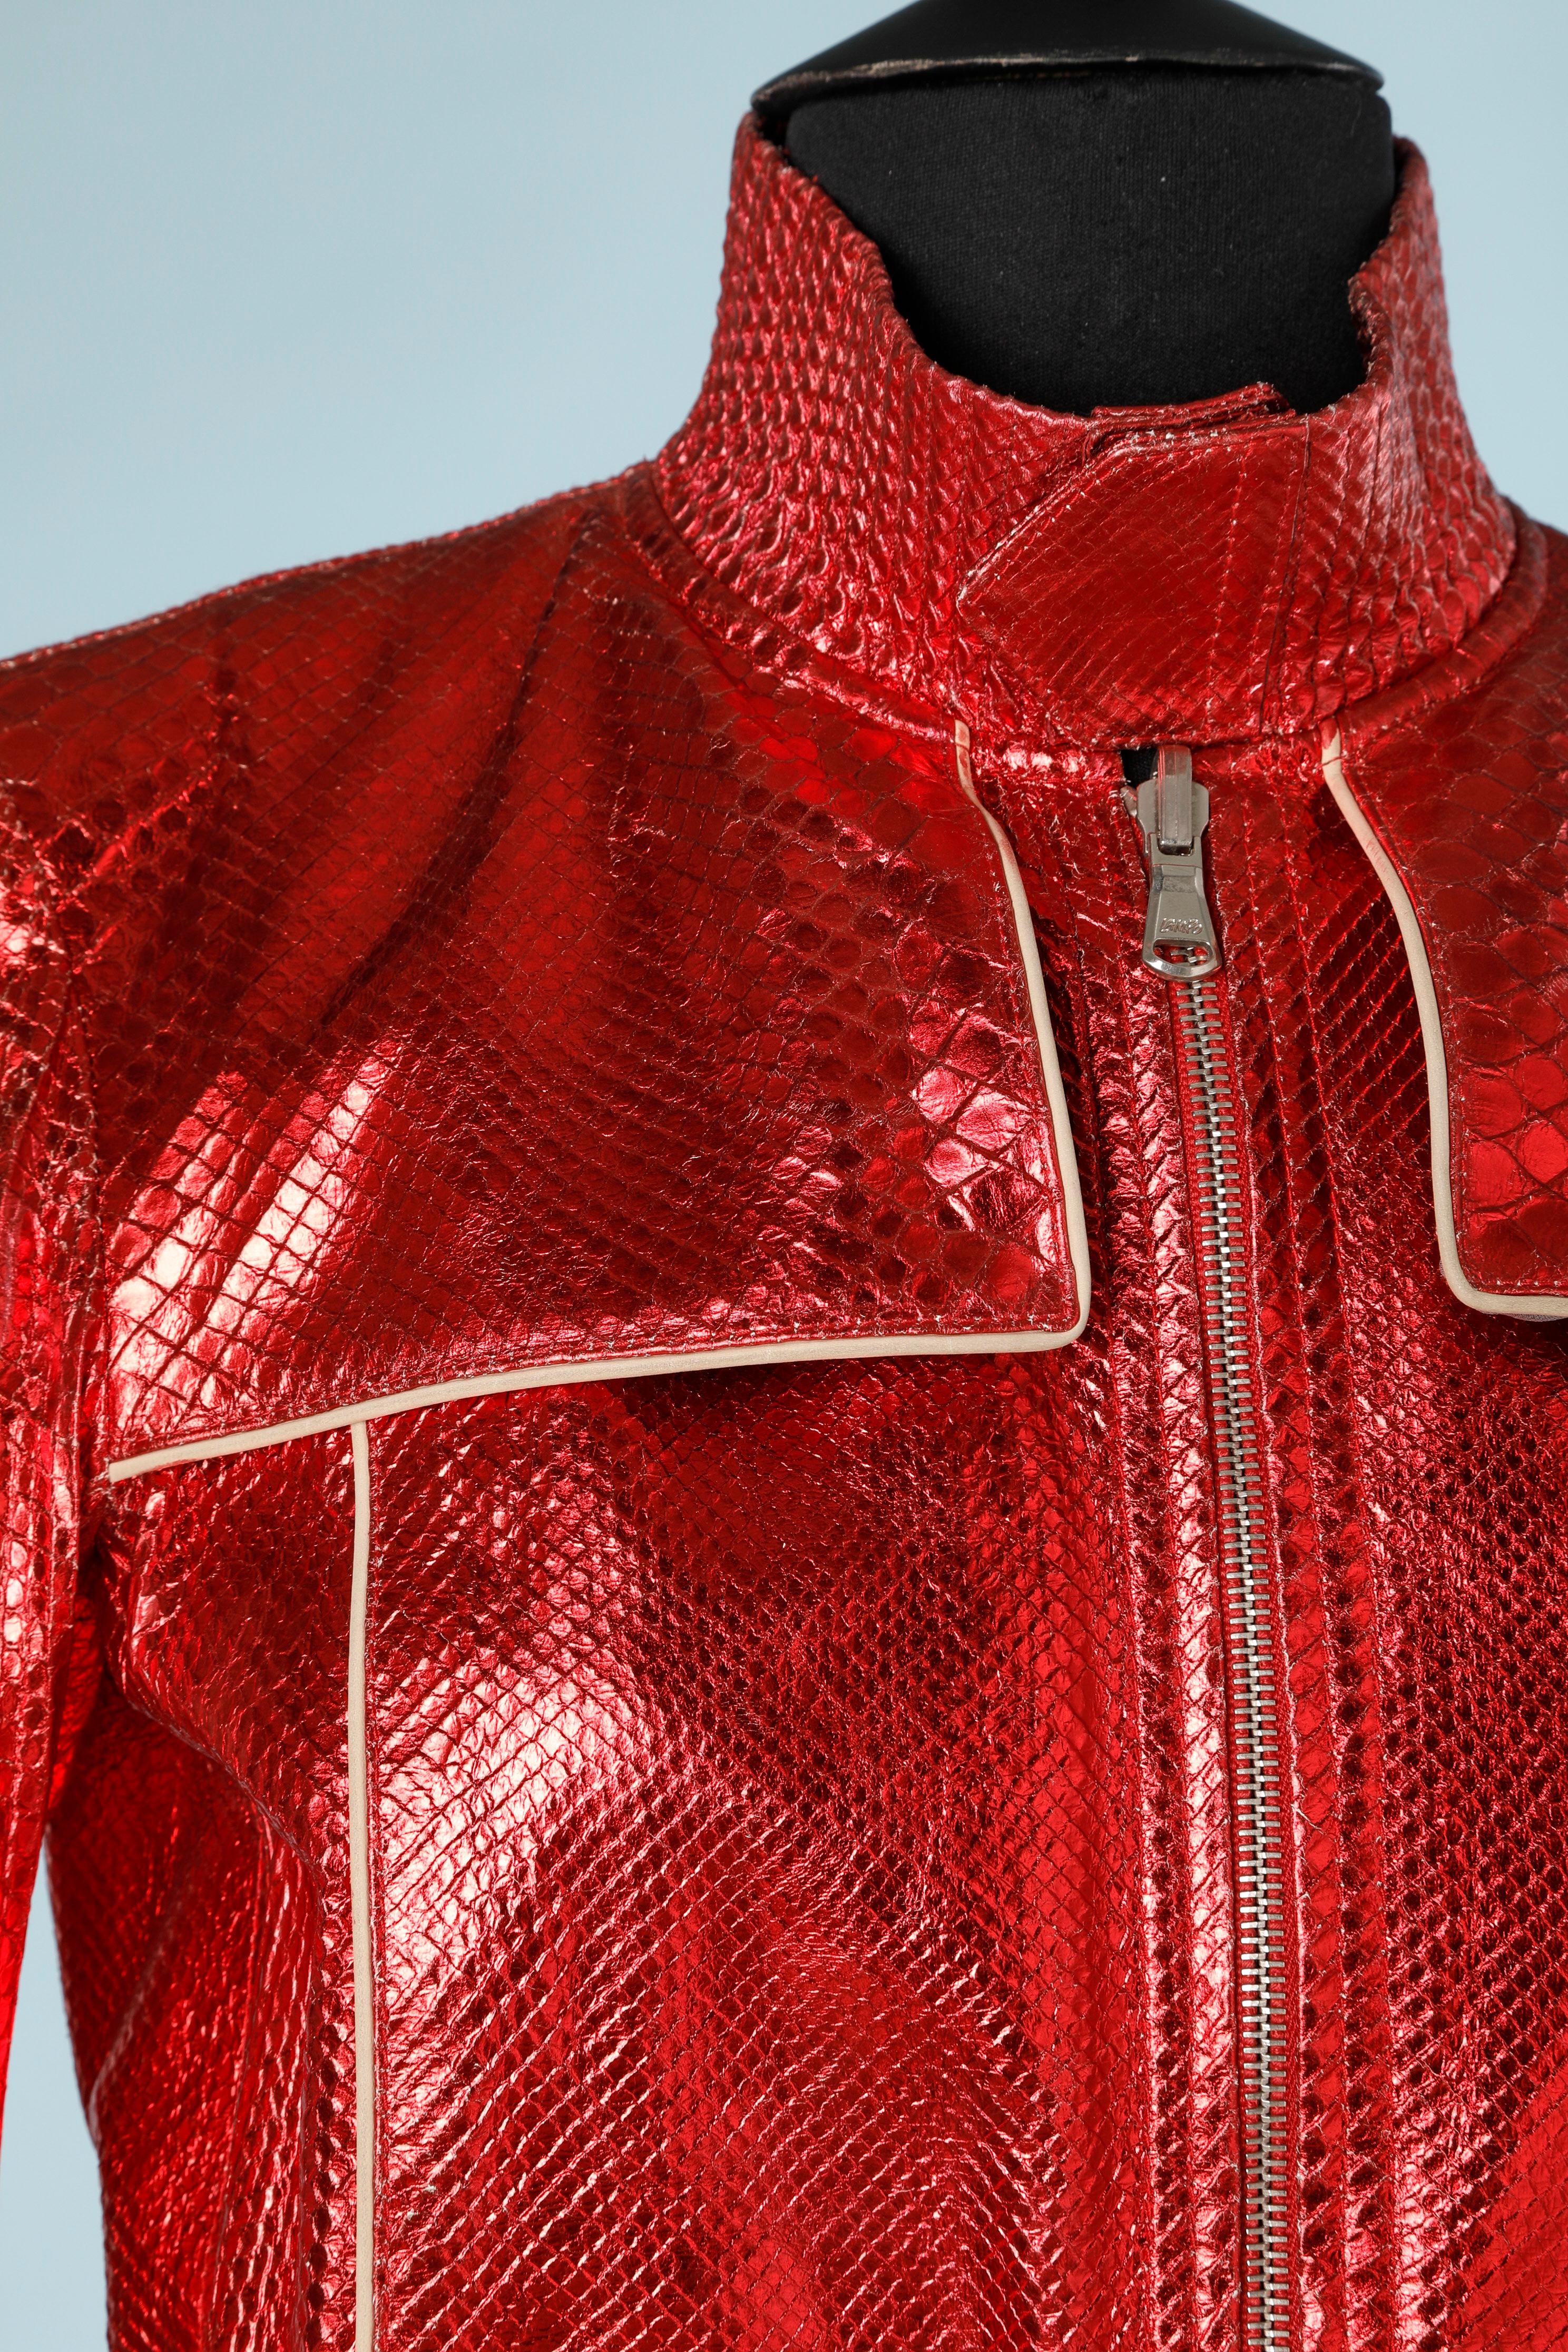 Red python jacket with white border lined with fully animal print python Shiro
back width 39cm
Size 38 French 
42 IT
All real leather 
specialist leather cleaning only 
This garment is made from top quality skins. Every single skin has been hand